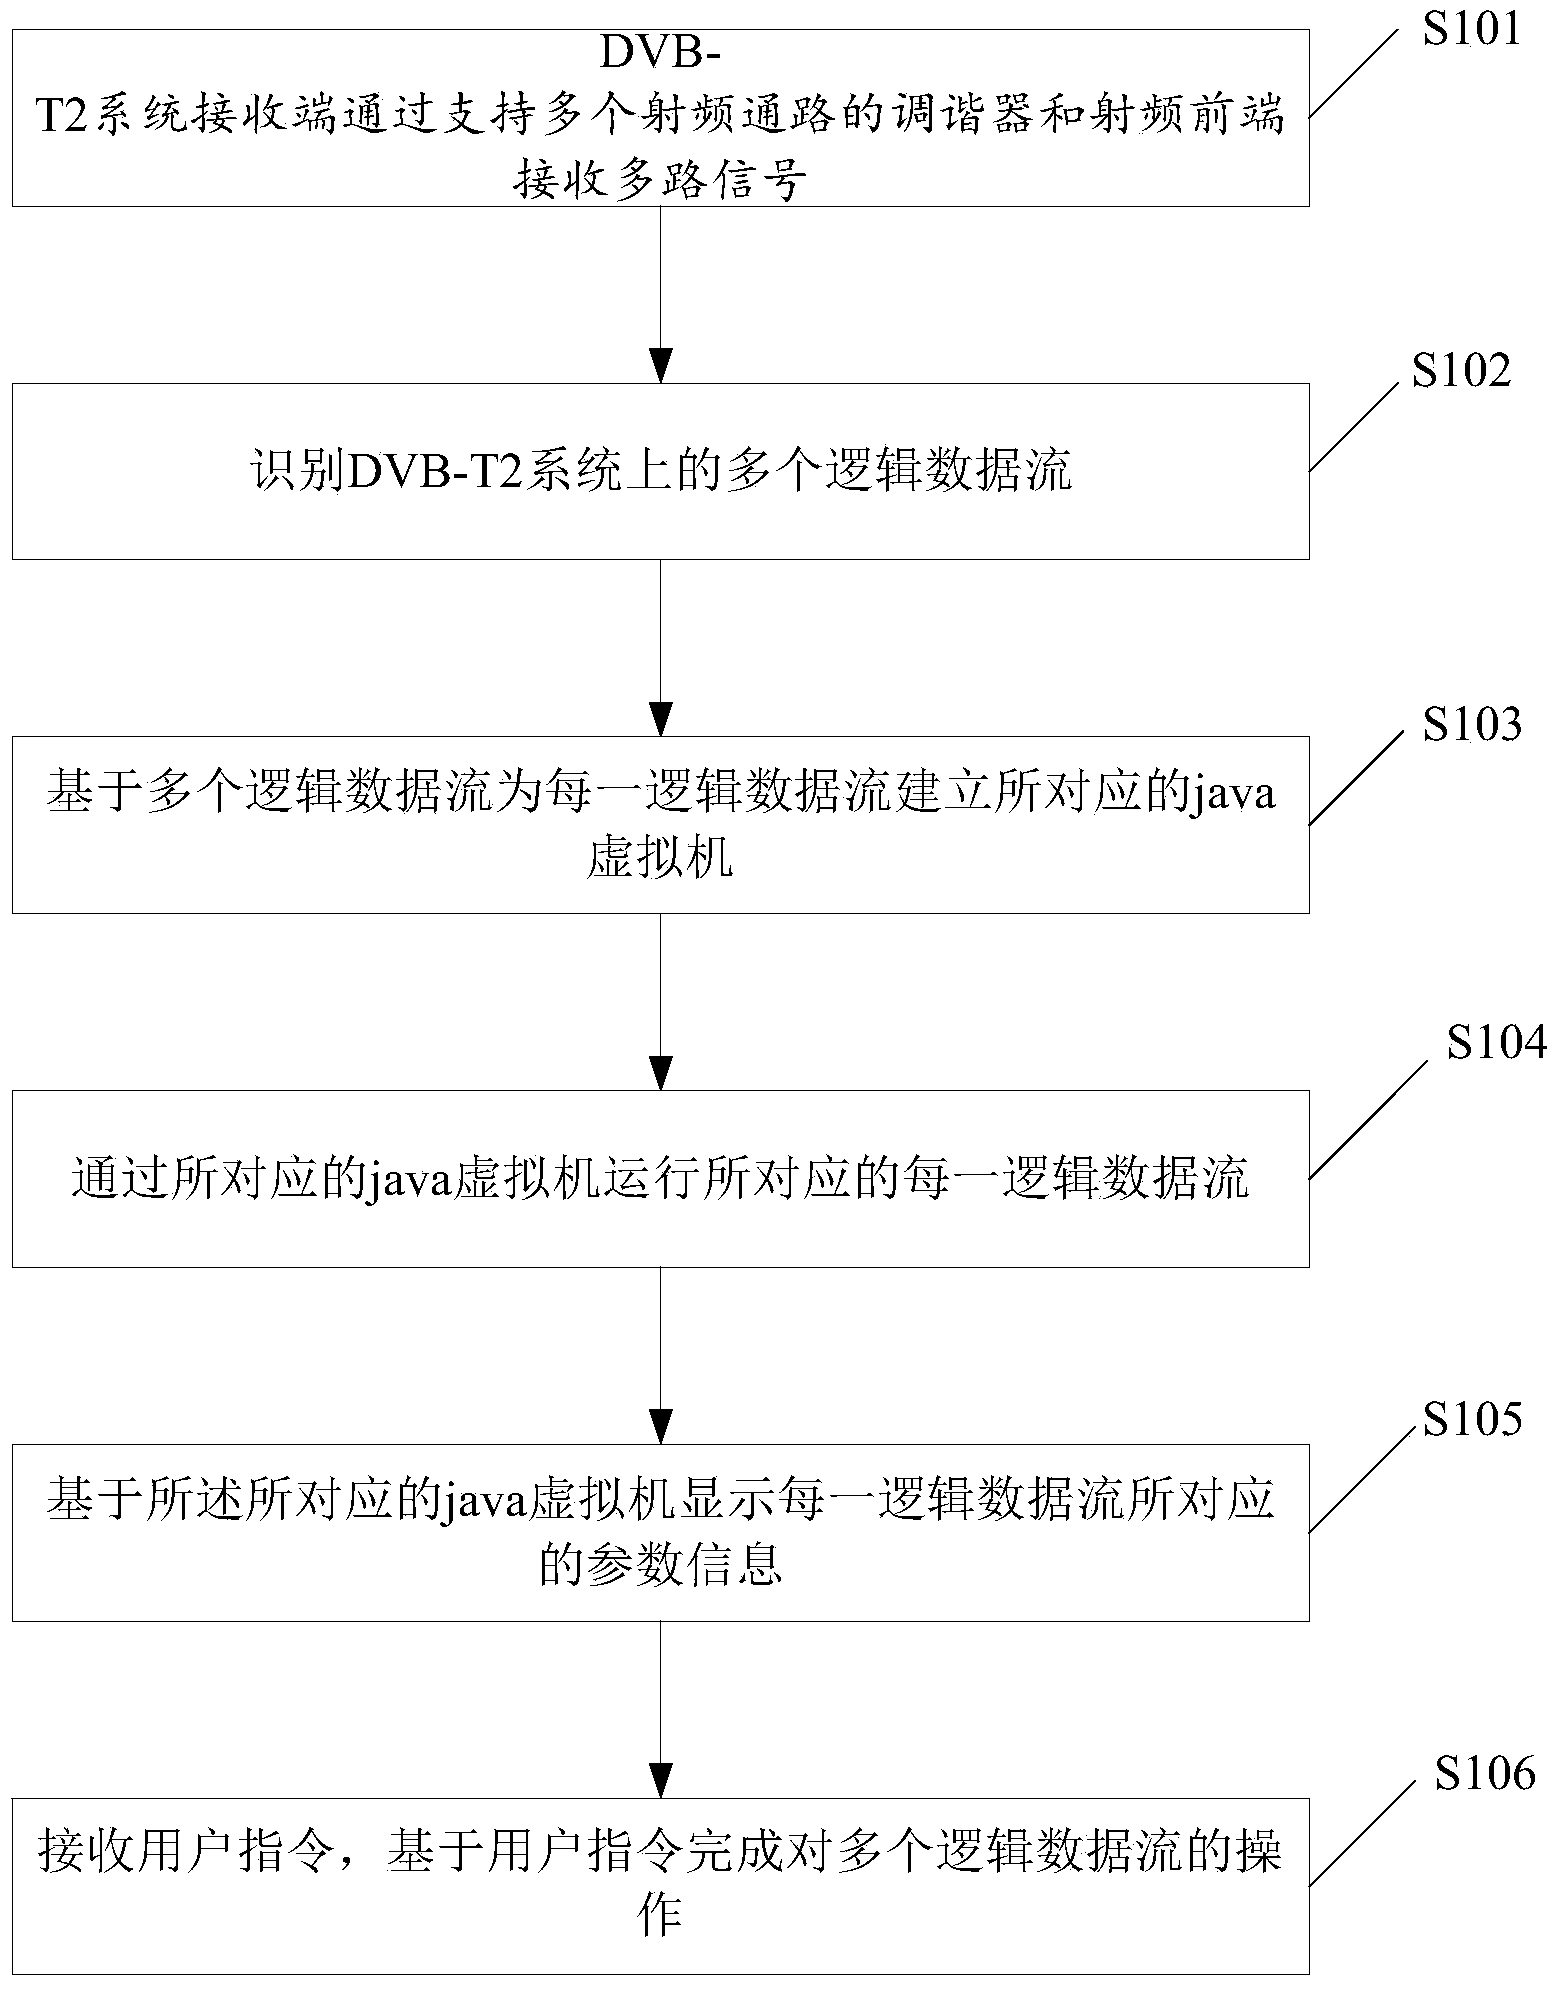 Method and system for extracting DVB-T2 code steam information through virtual machine